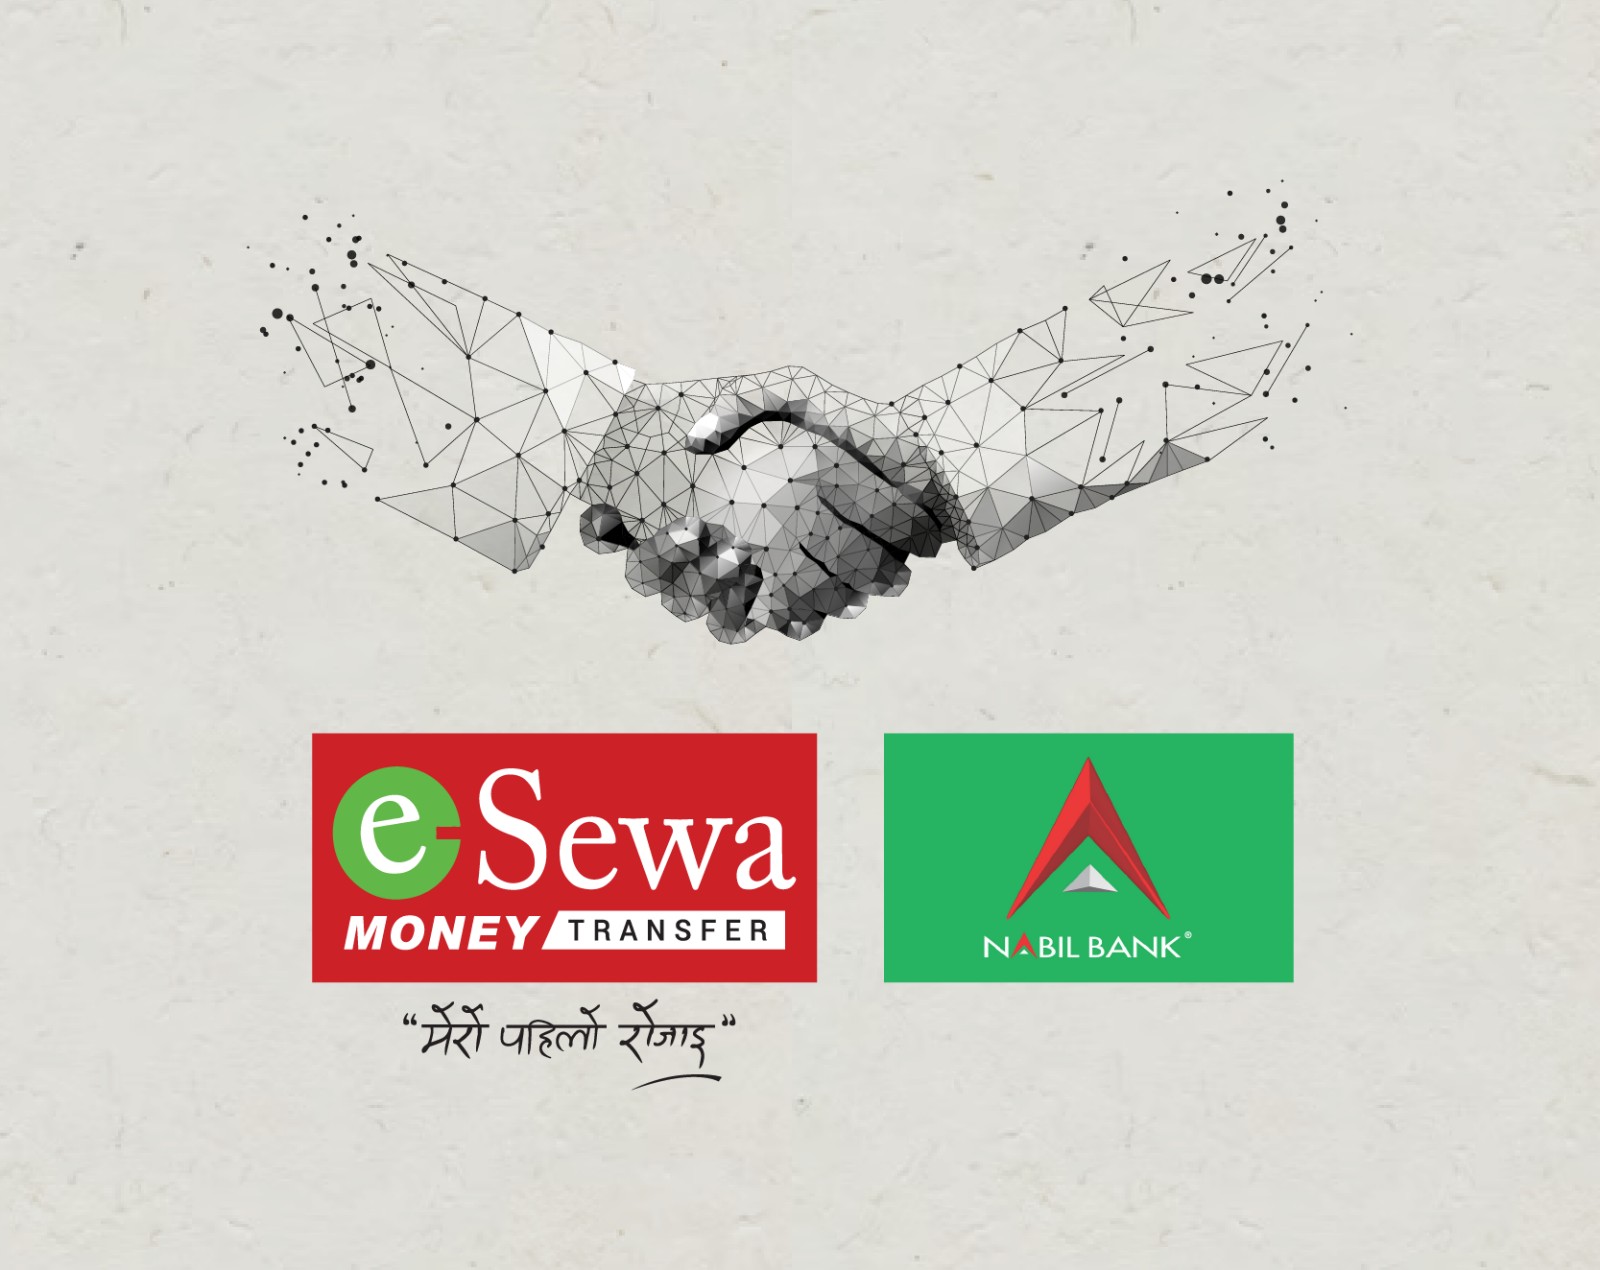 Esewa Money Transfer partners with Nabil Bank to provide Remittance services